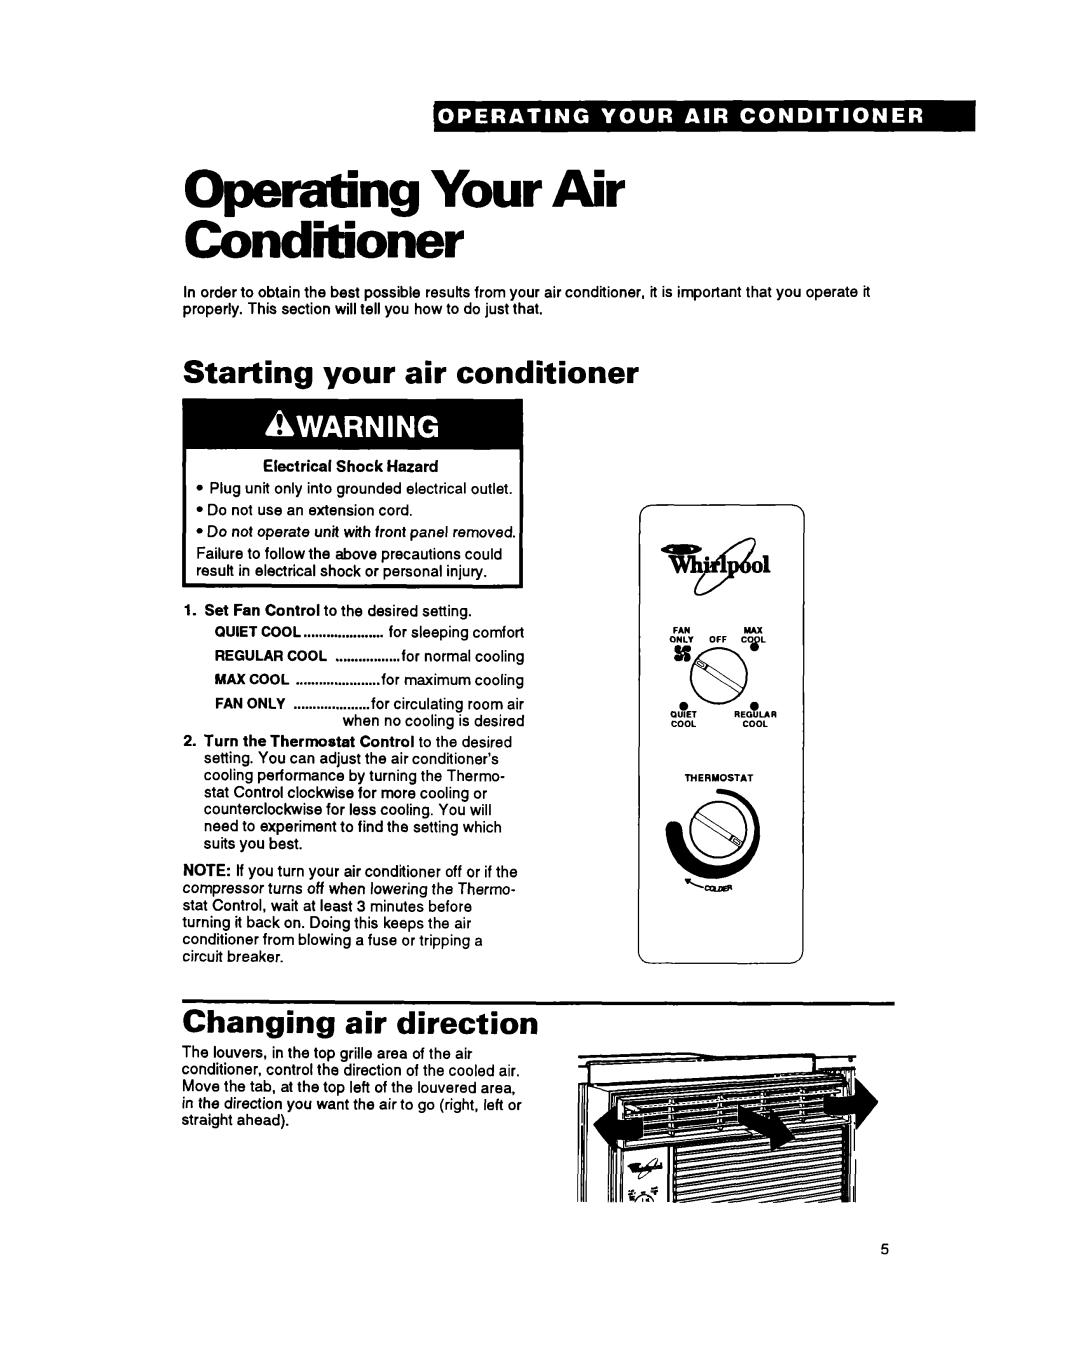 Whirlpool ACM052 warranty Operating Your Air Conditioner, Starting your air conditioner, Changing, direction, mm01 H 